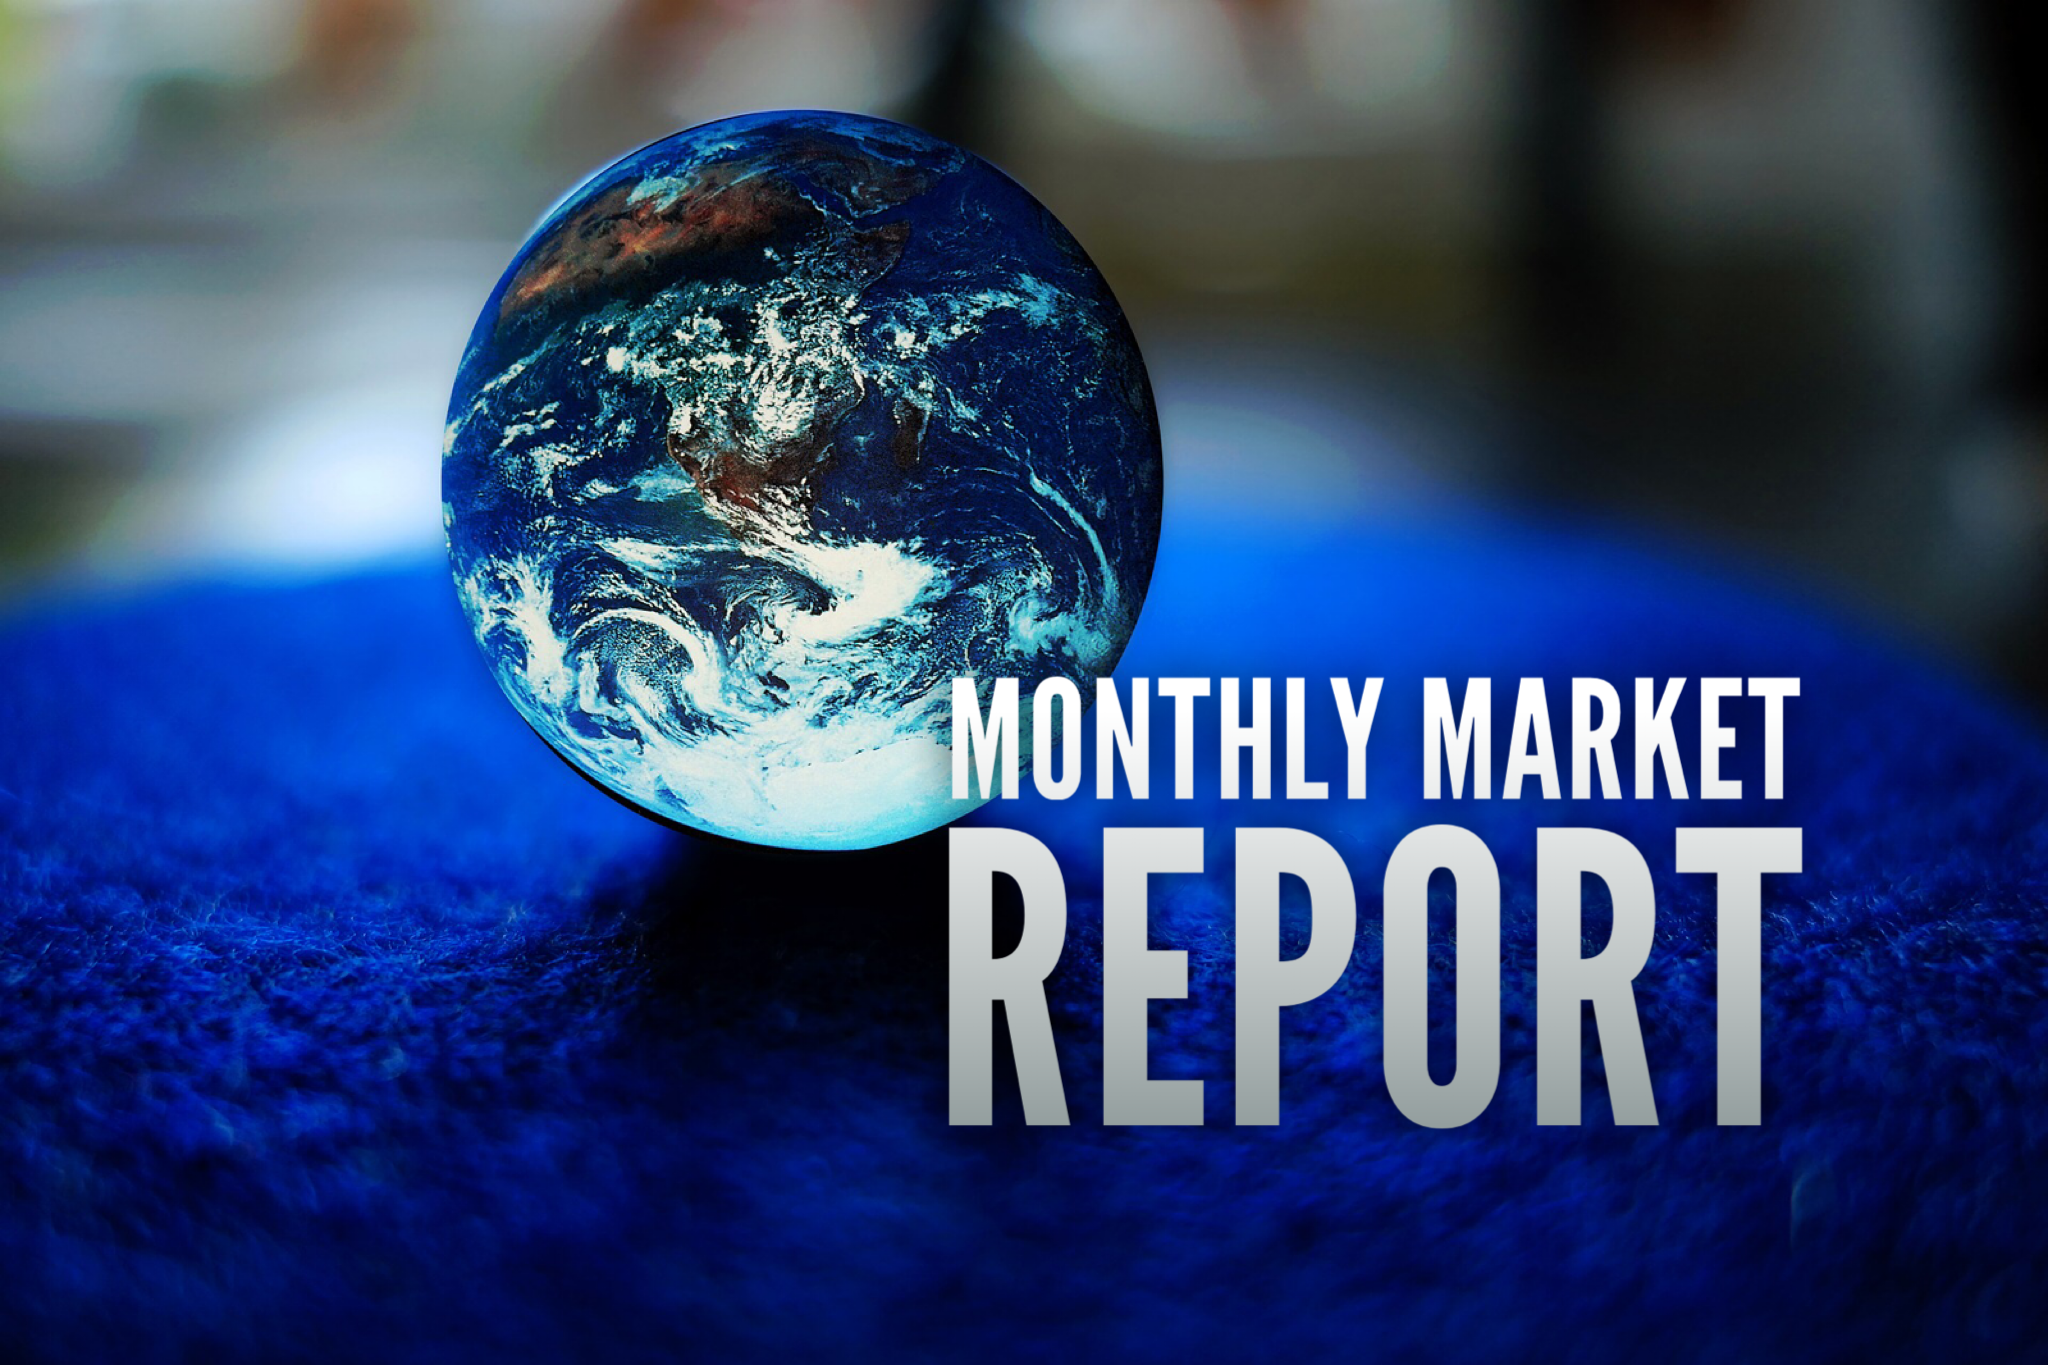 MONTHLY MARKET REPORT: February 2018